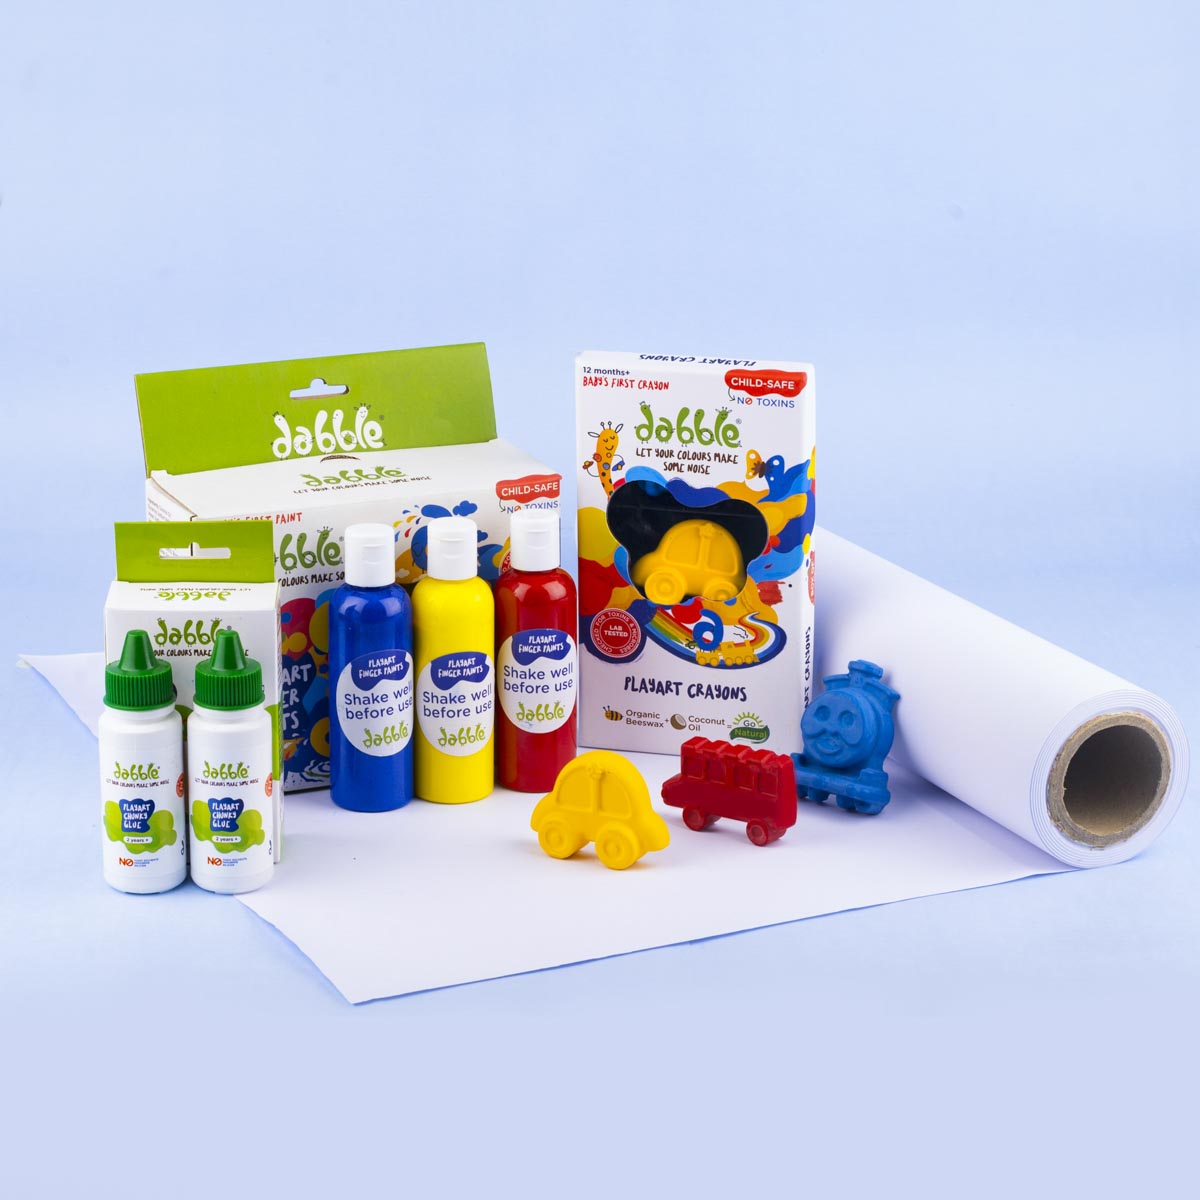 Toxin-Free and Child-Safe supplies for Toddlers